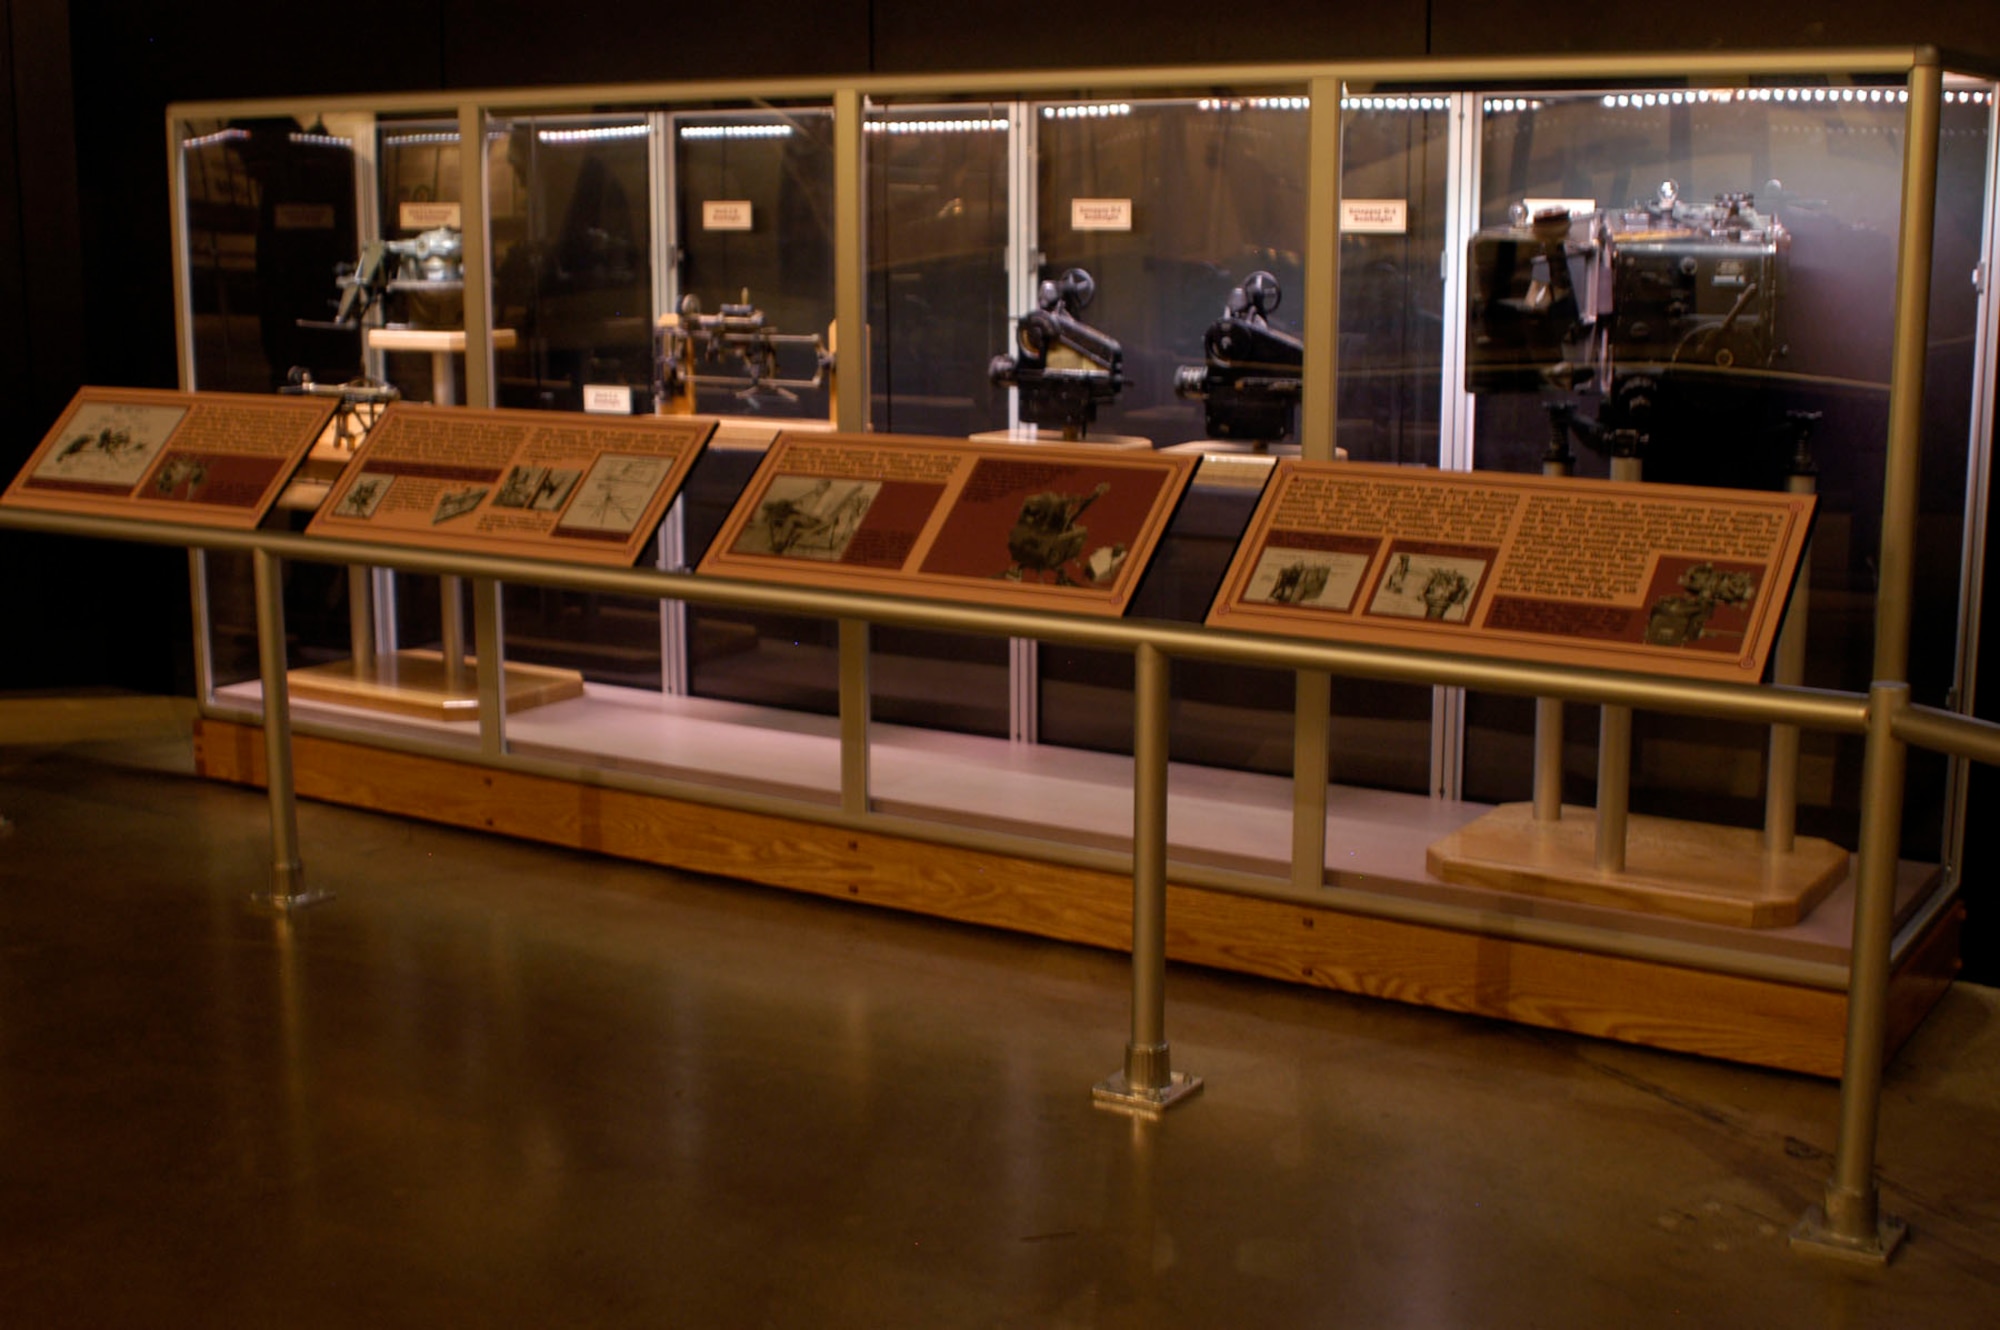 DAYTON, Ohio - Interwar Bombsight exhibit in the Early Years Gallery at the National Museum of the U.S. Air Force. (U.S. Air Force photo)